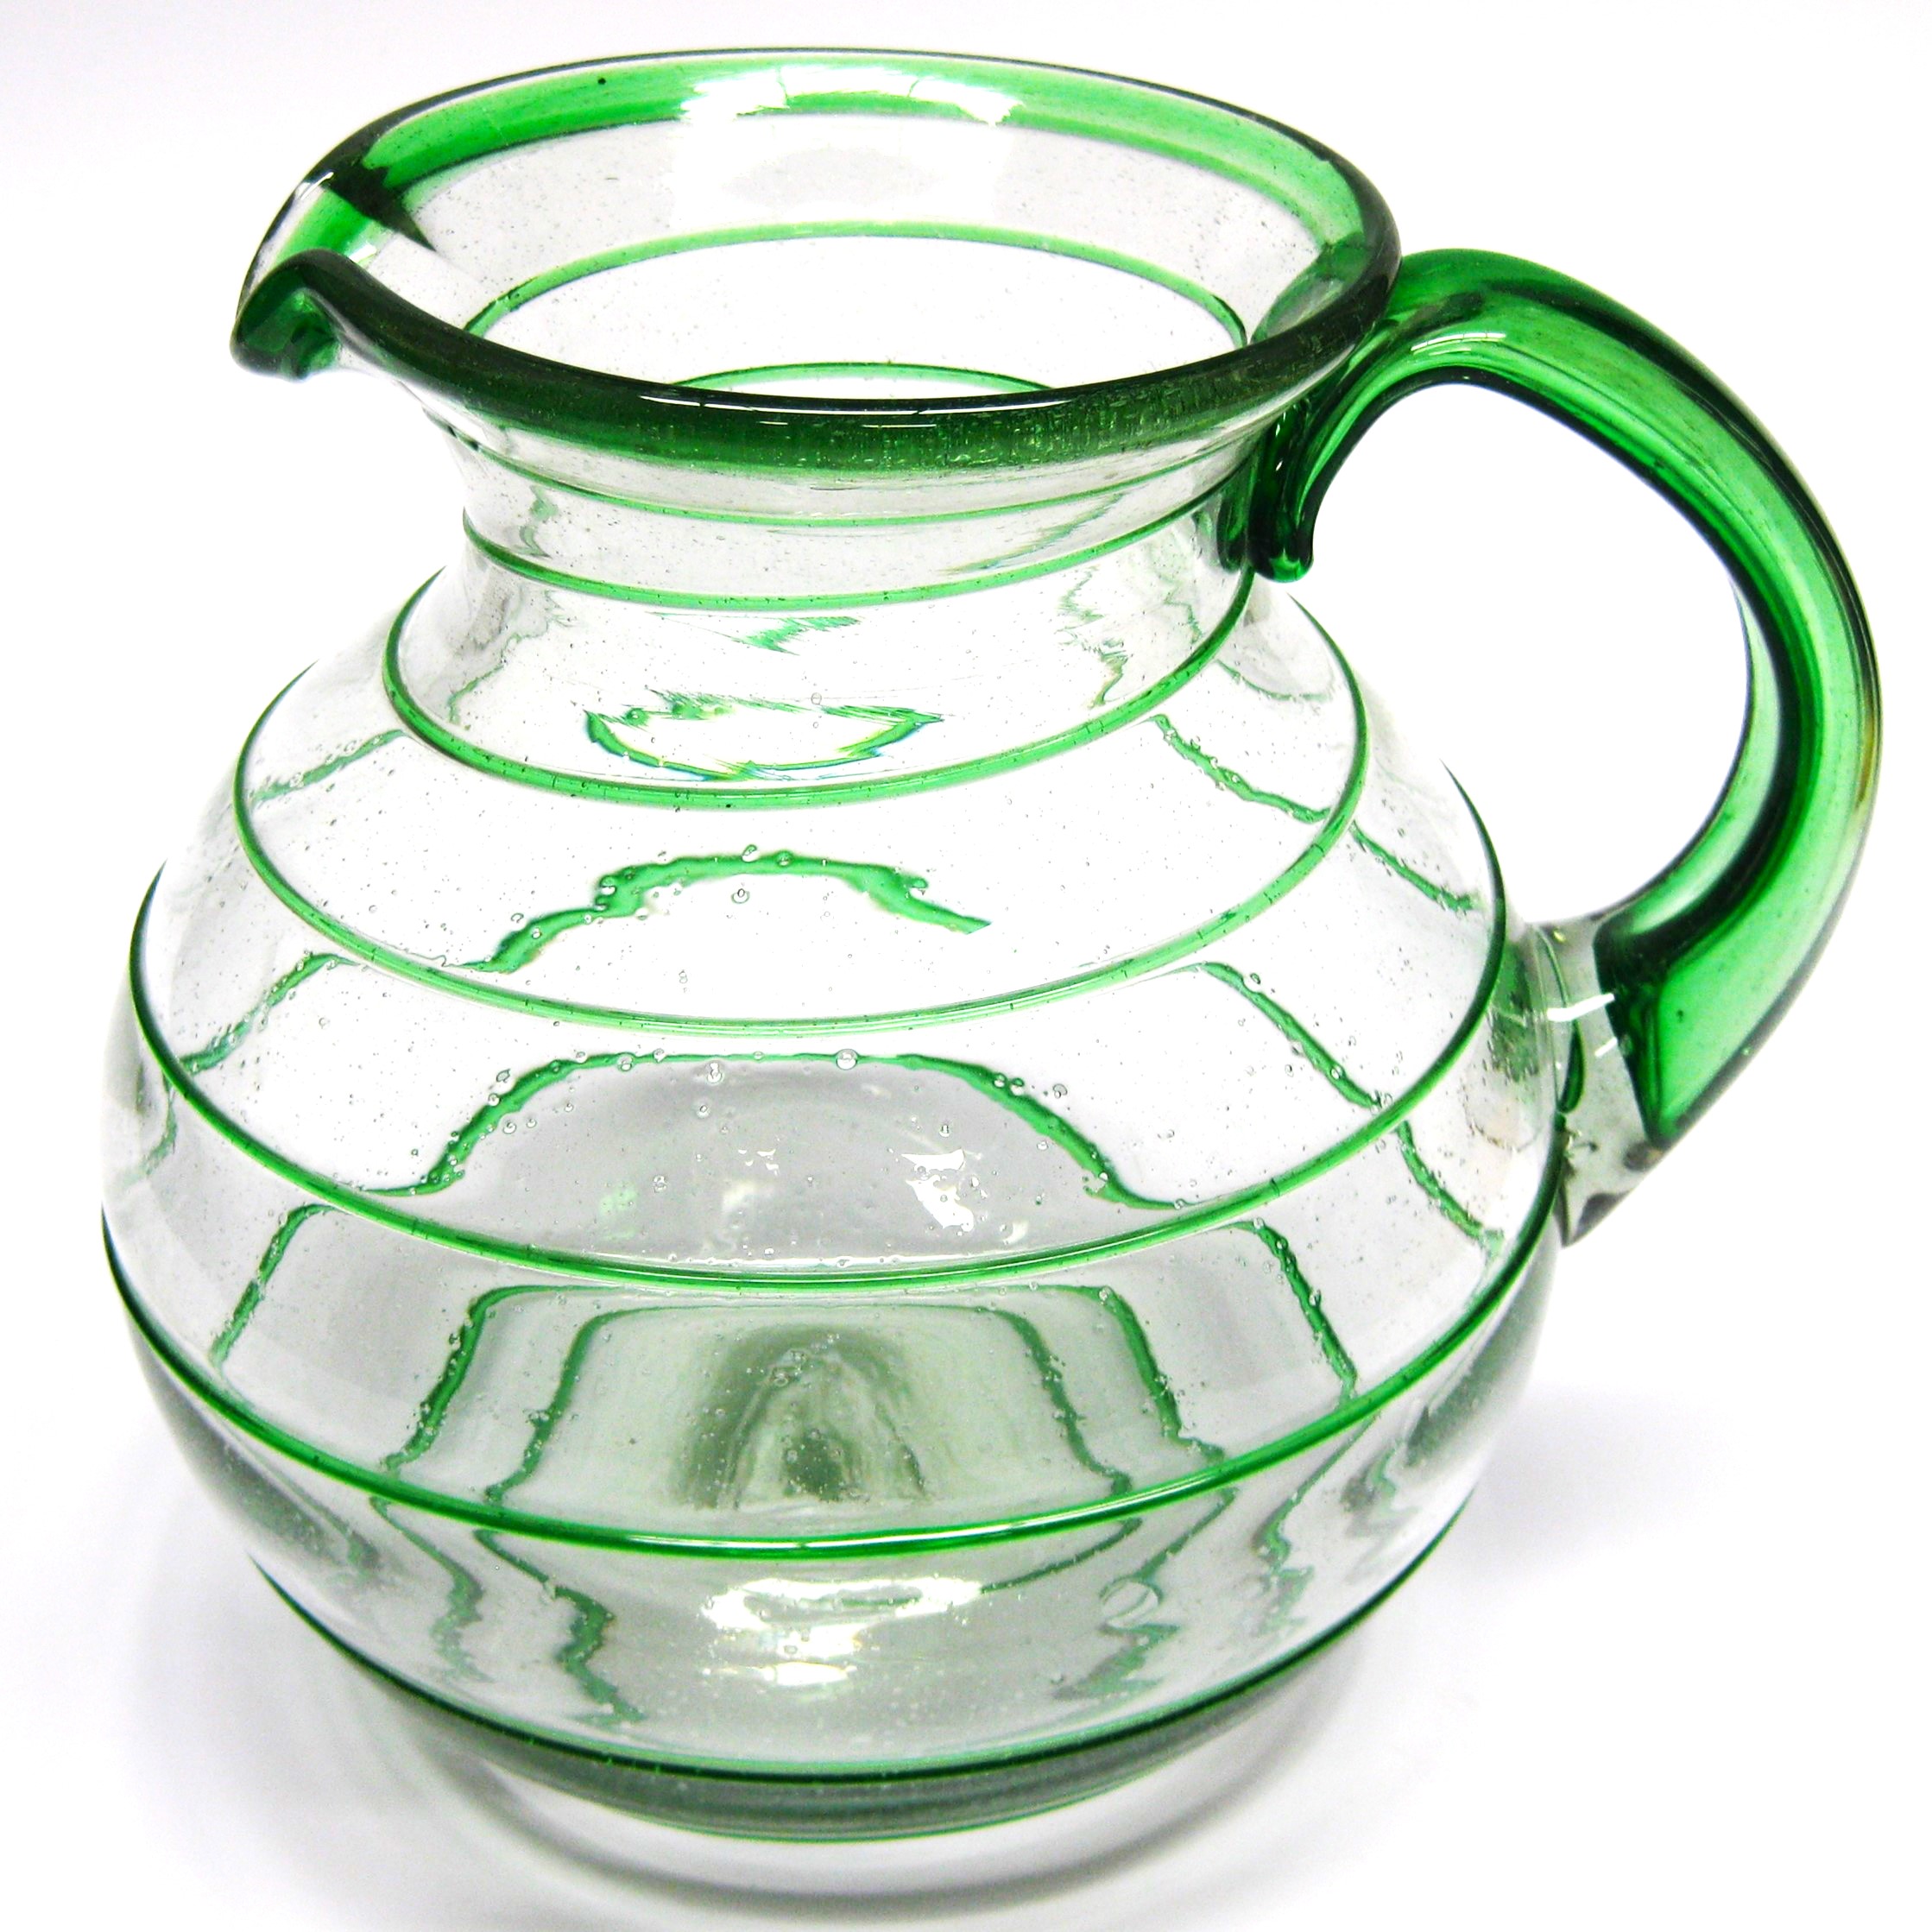 Wholesale Spiral Glassware / Emerald Green Spiral 120 oz Large Bola Pitcher / A classic with a modern twist, this pitcher is adorned with a beautiful emerald green spiral.